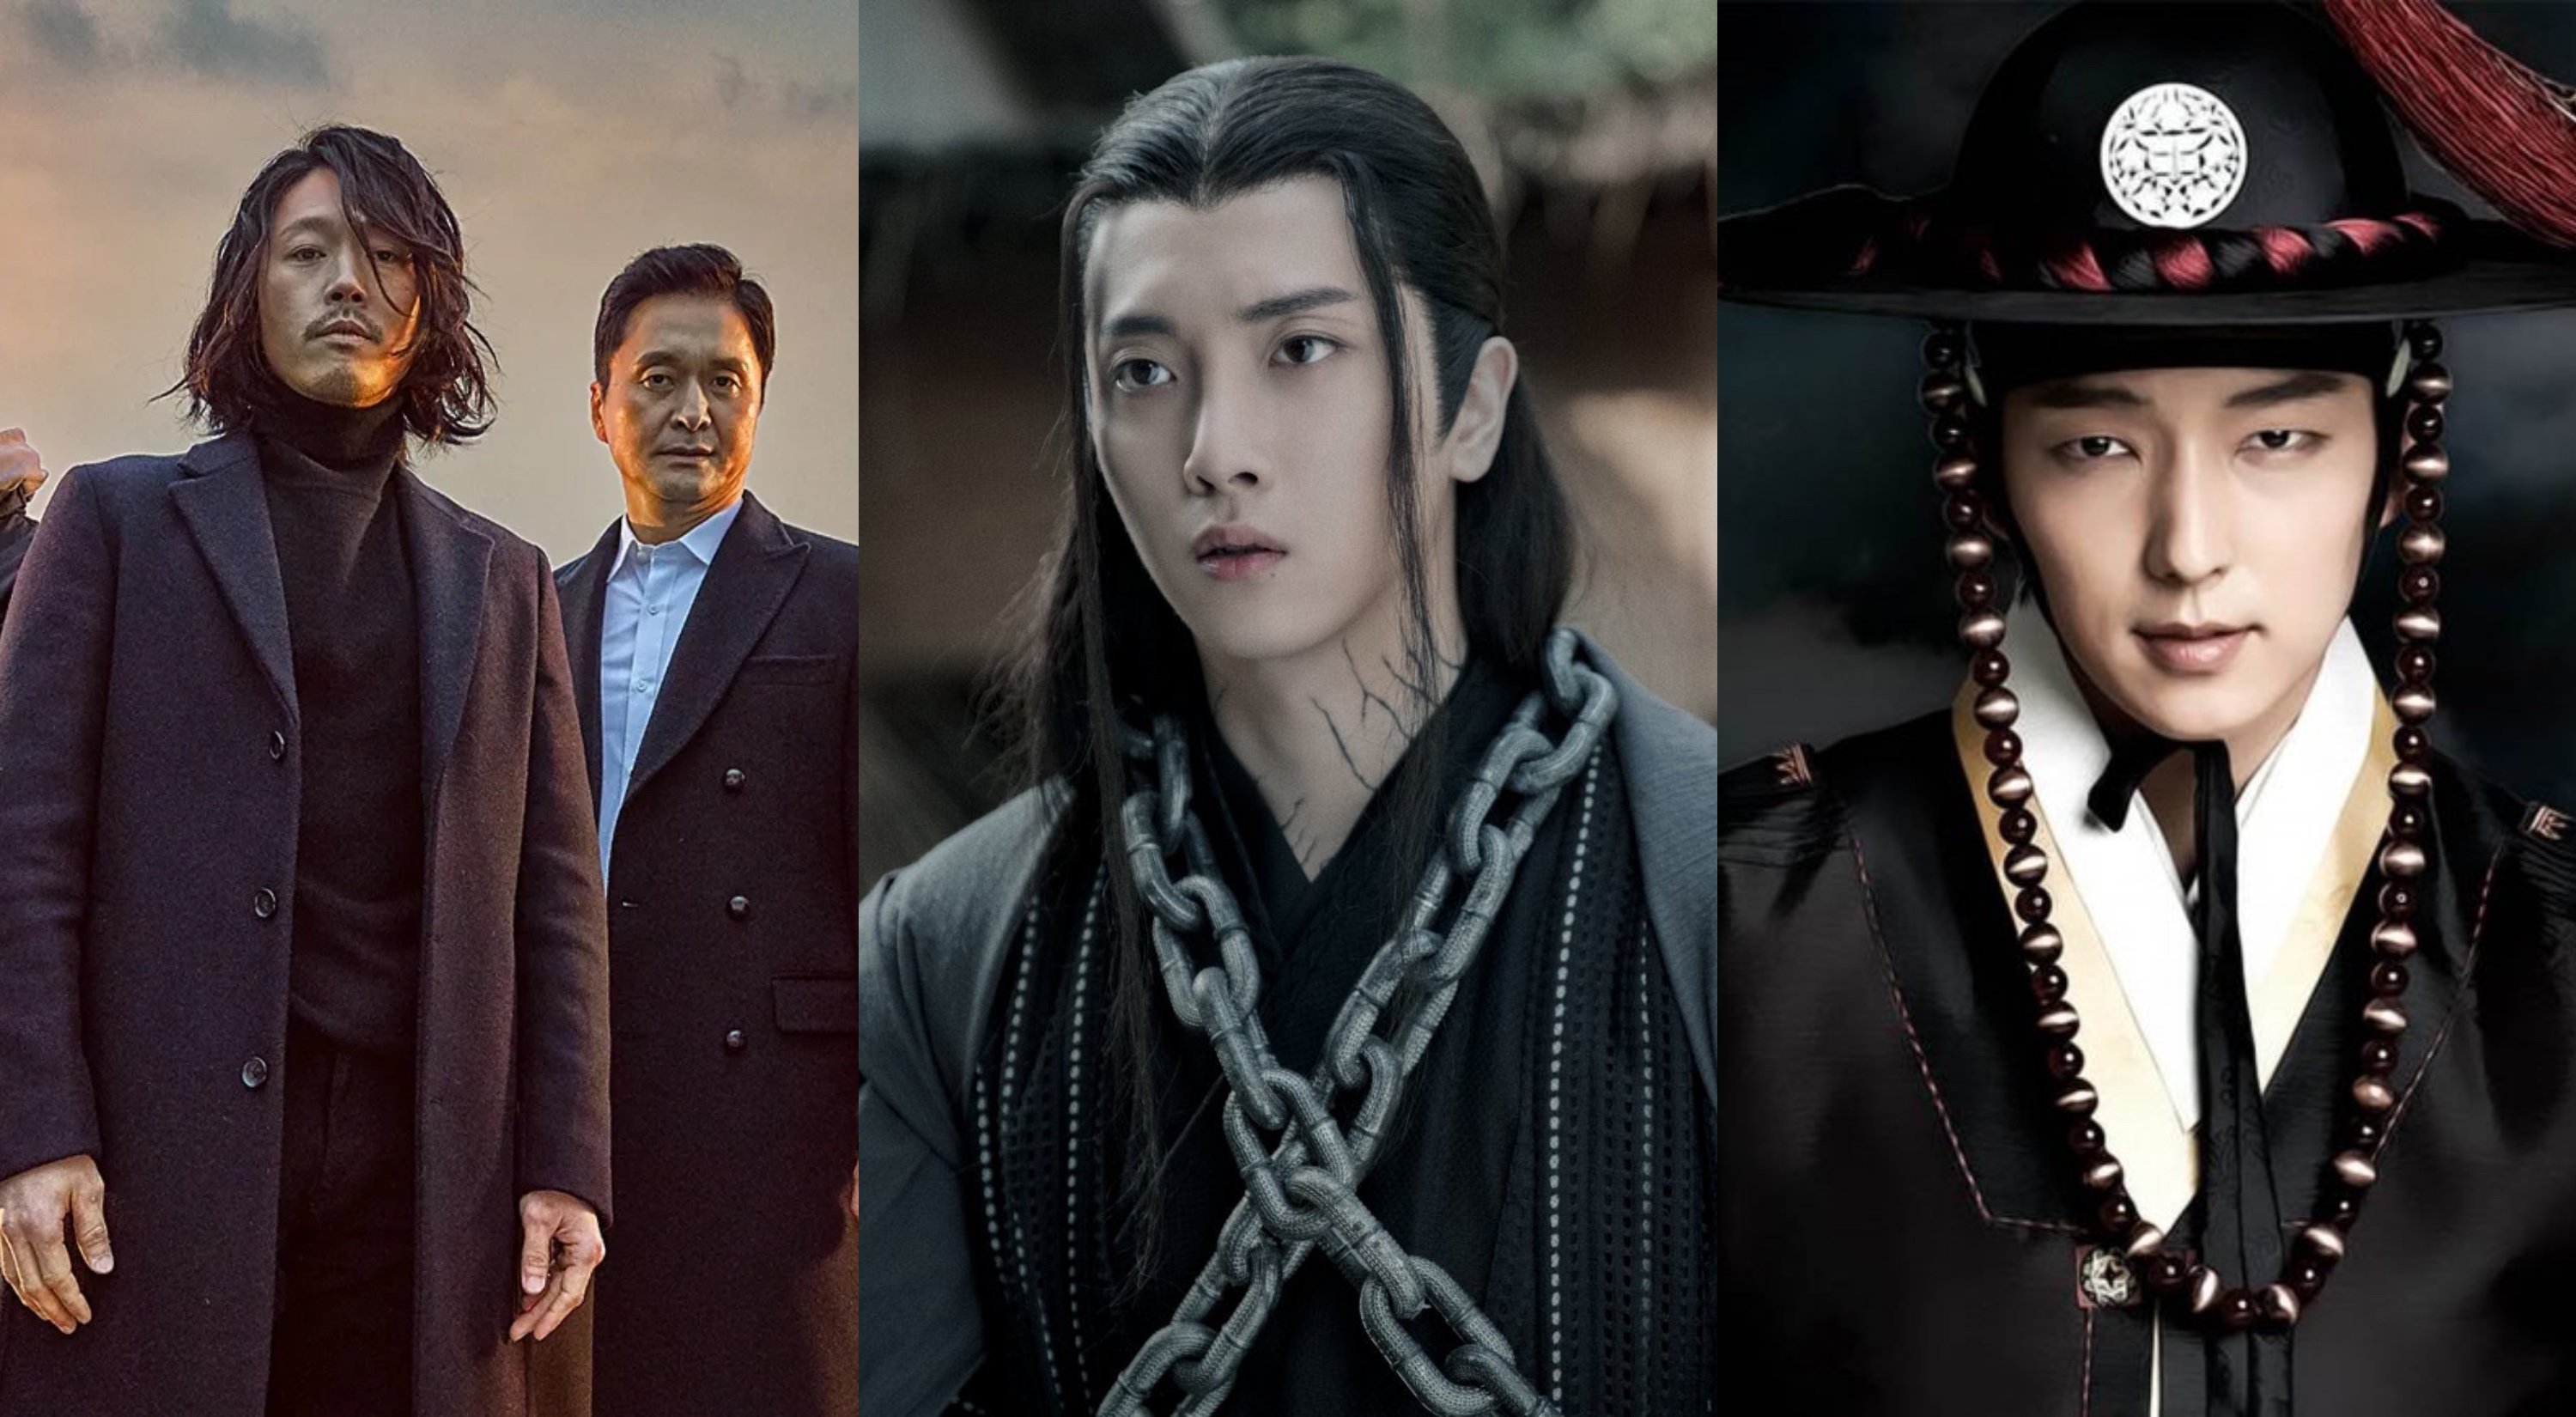 'Tell Me What You Saw,' The Living Dead,' and 'Scholar Who Walks the Night' K-drama and Halloween dramas split posters